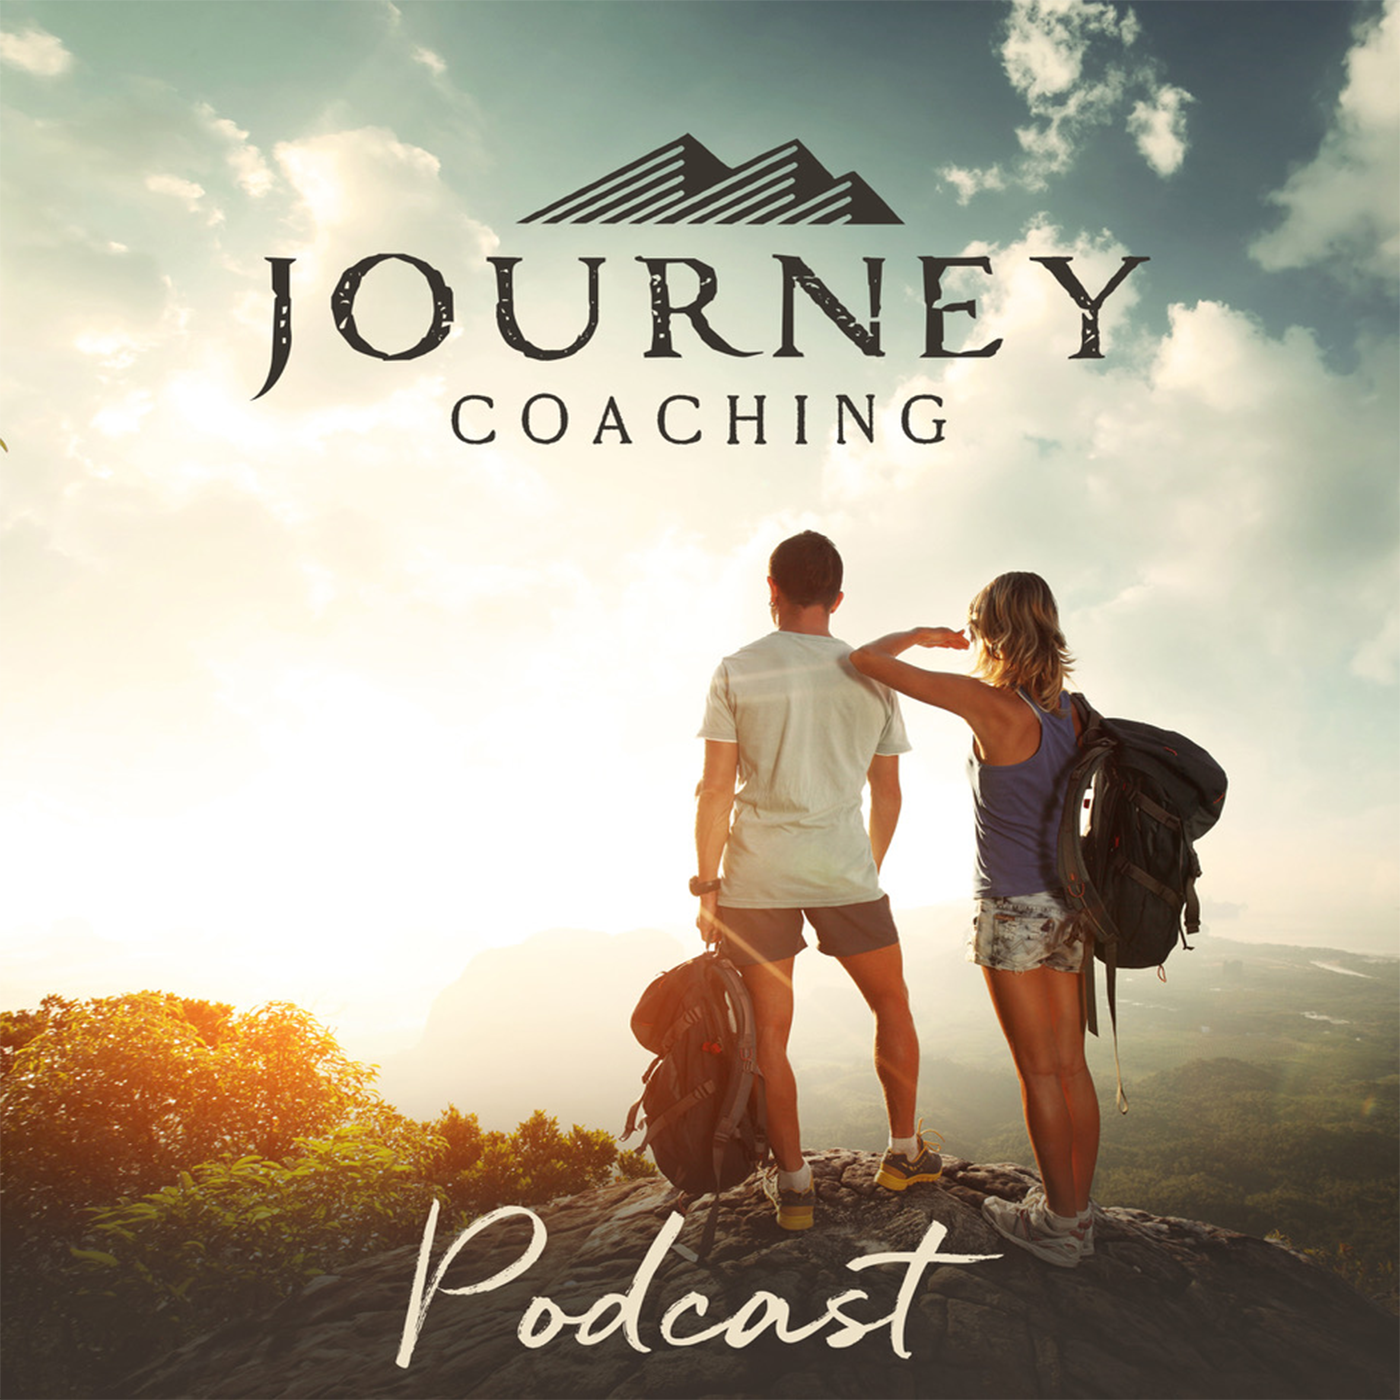 the coaching journey podcast